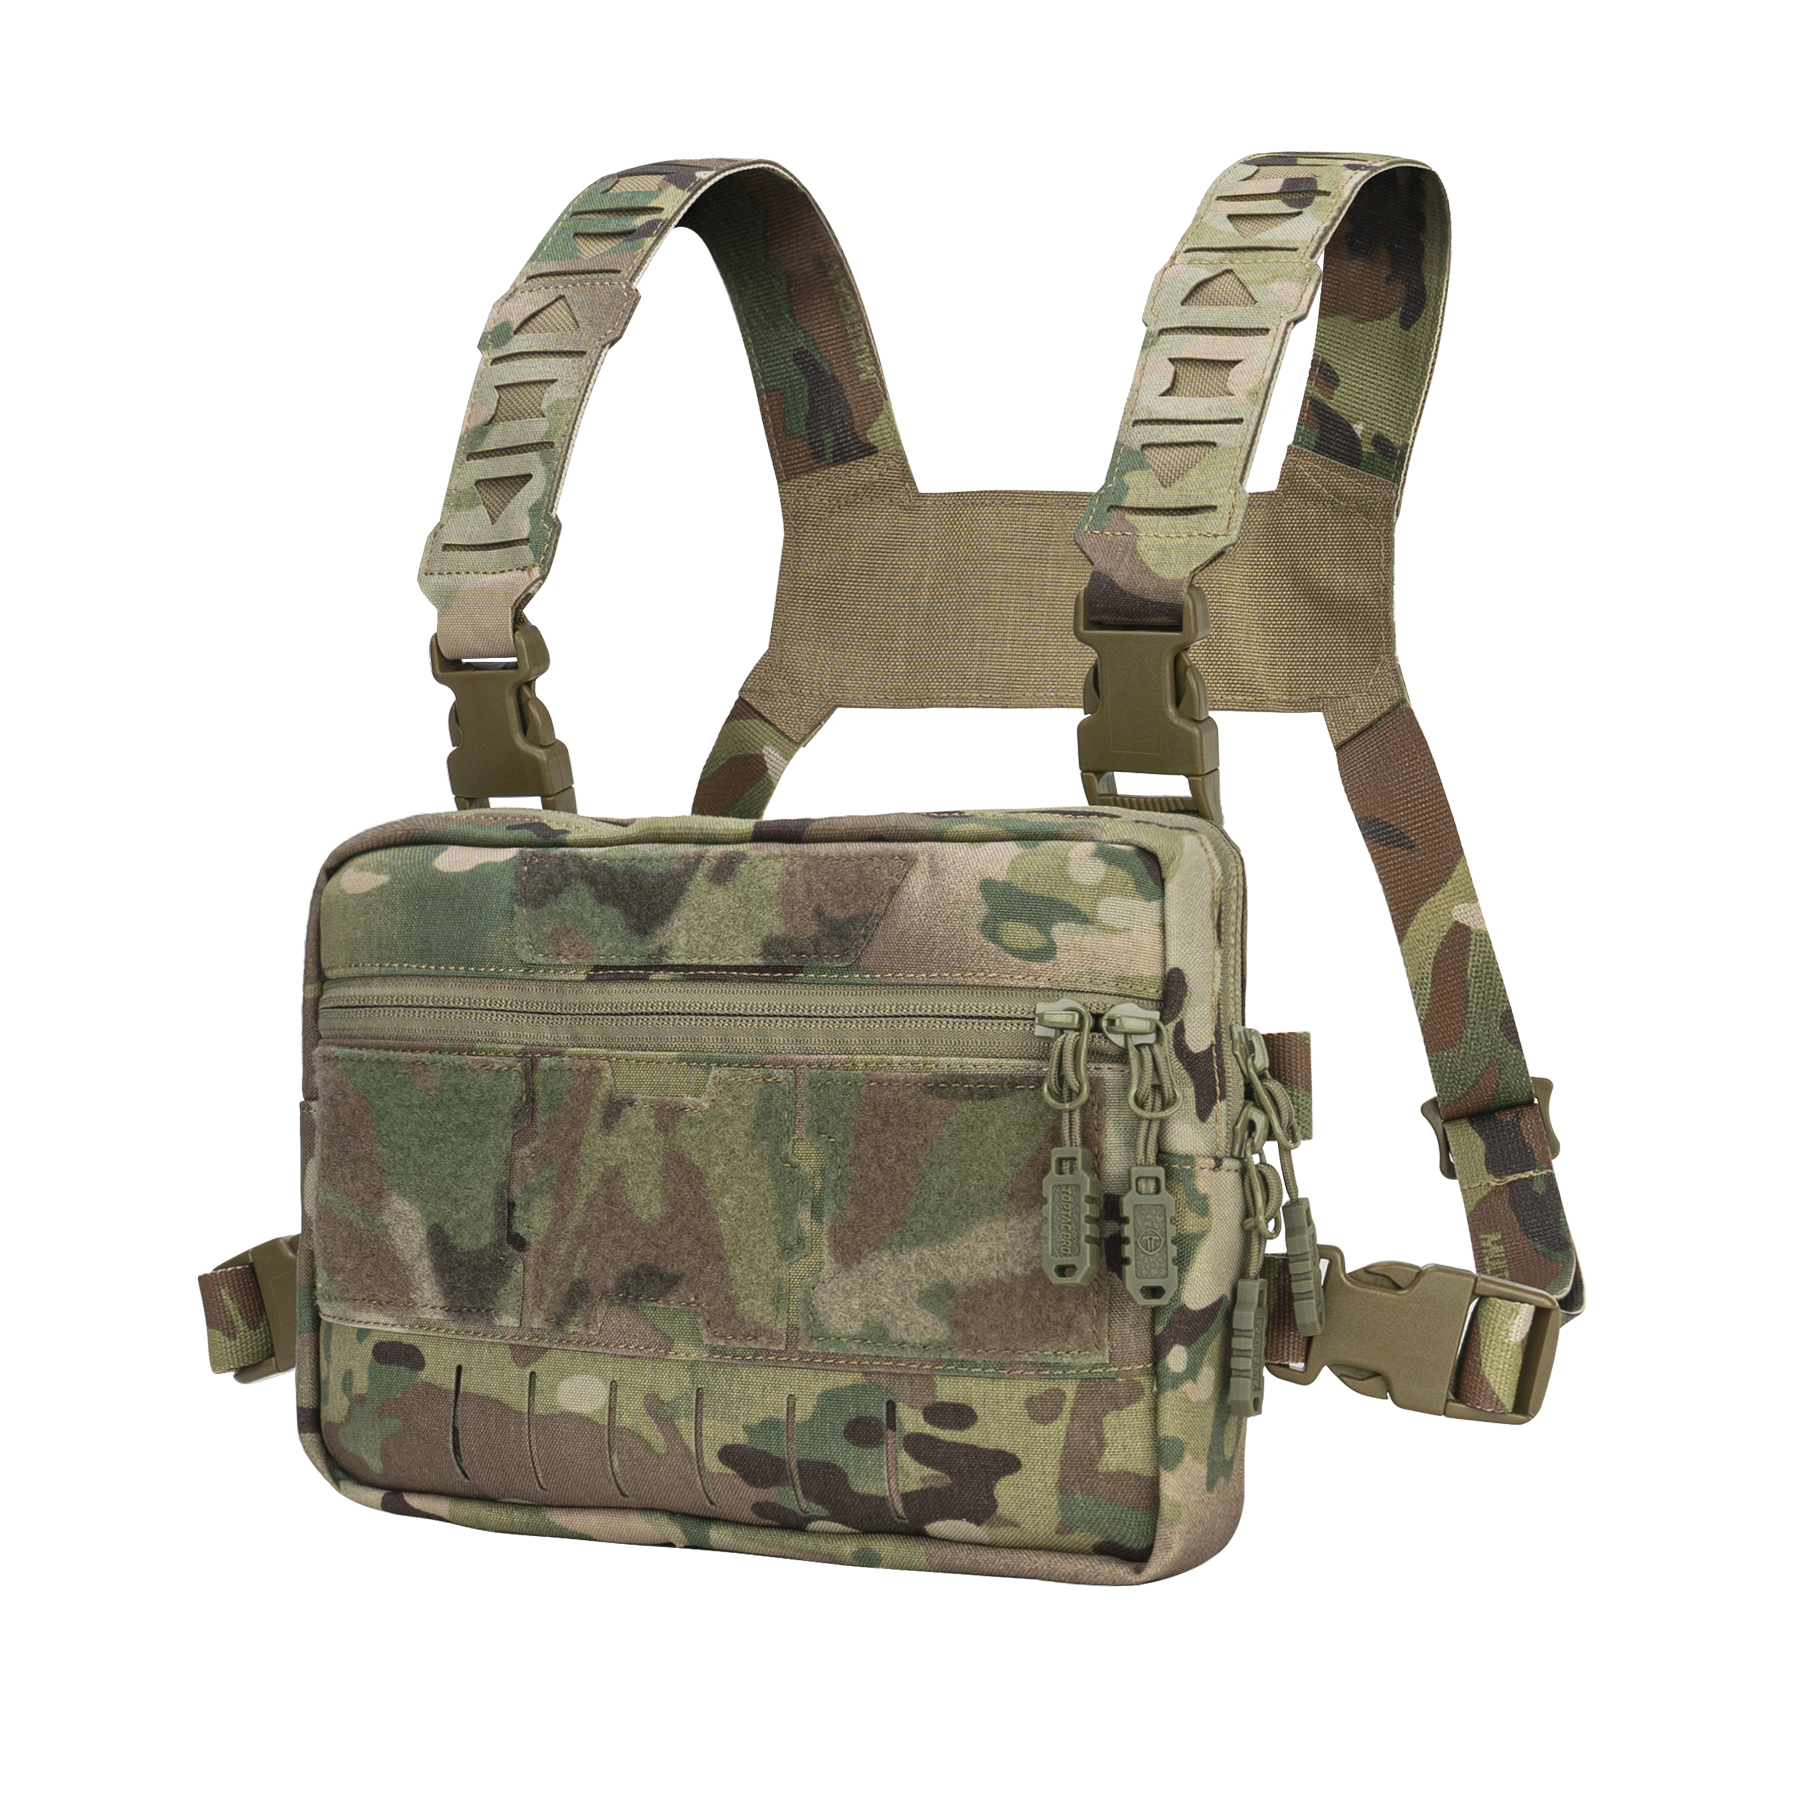 TOPTACPRO Tatcical Chest Rig Bag Chest Recon Bag MOLLE Adjustable Shoulder Strap Pack 8511